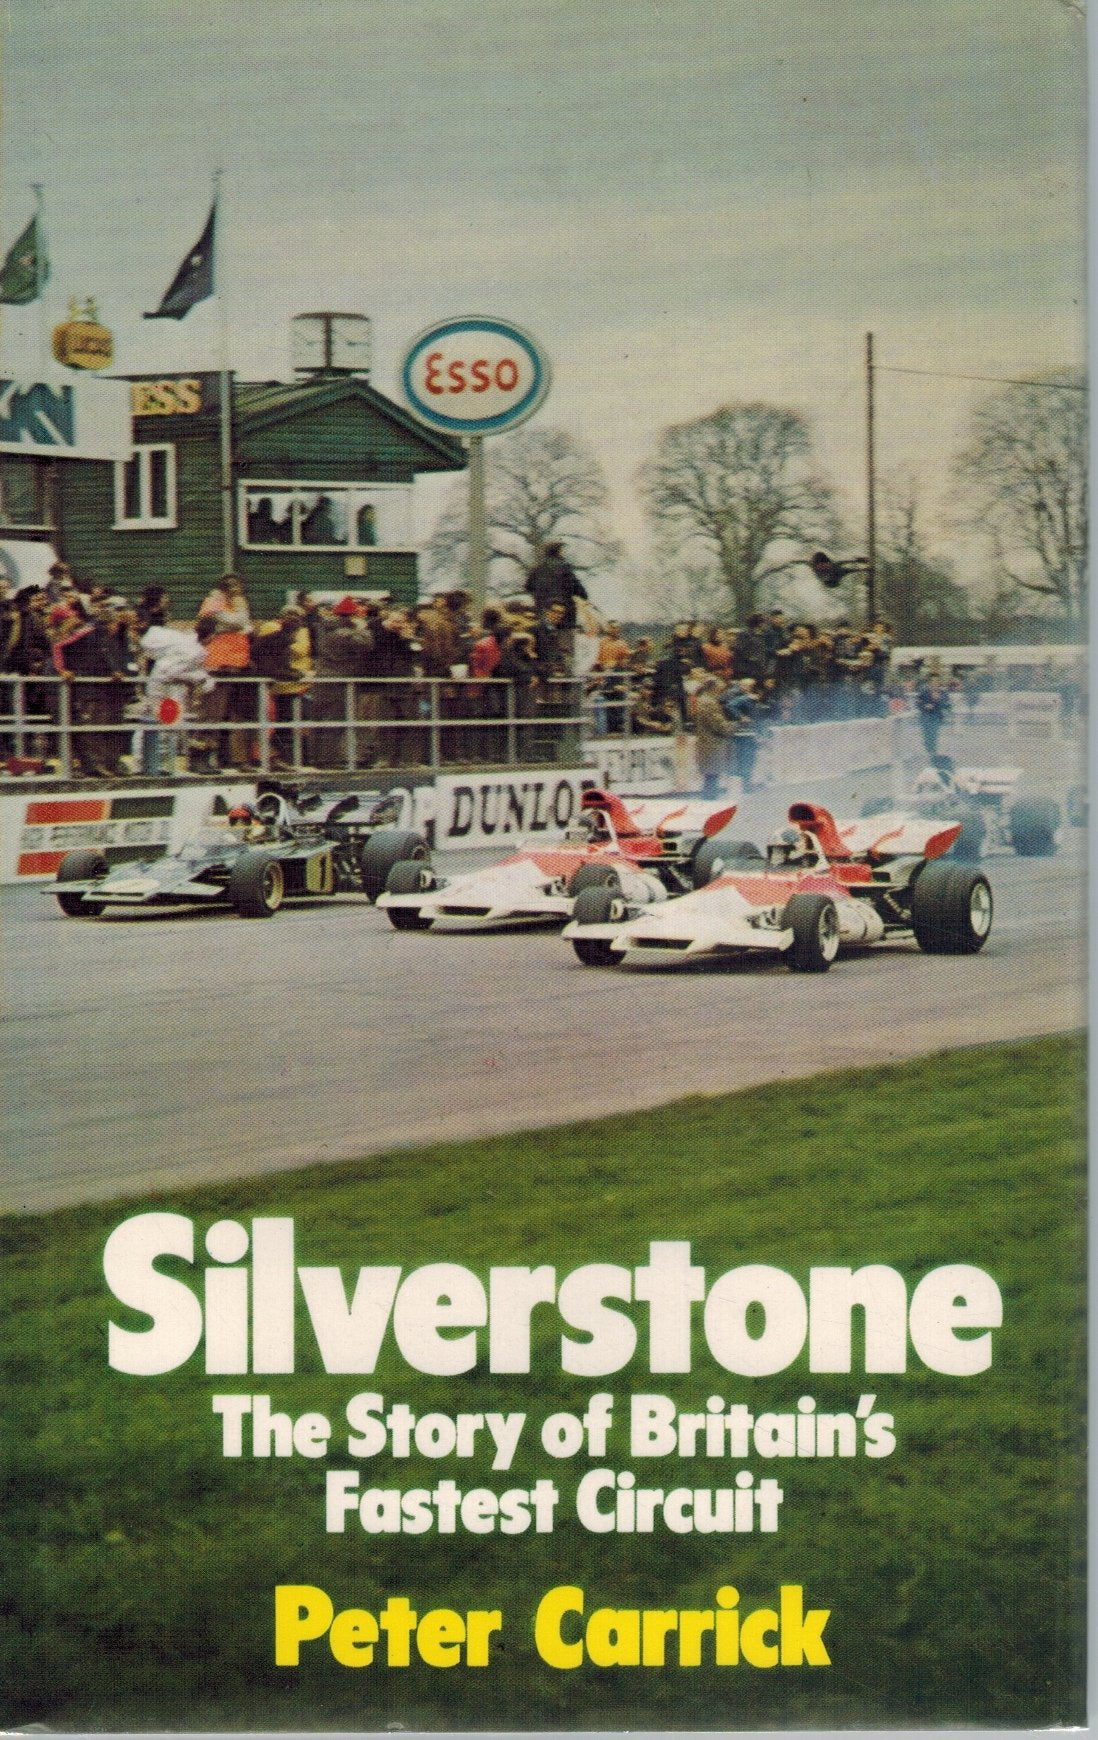 Silverstone  The Story of Britain's Fastest Circuit